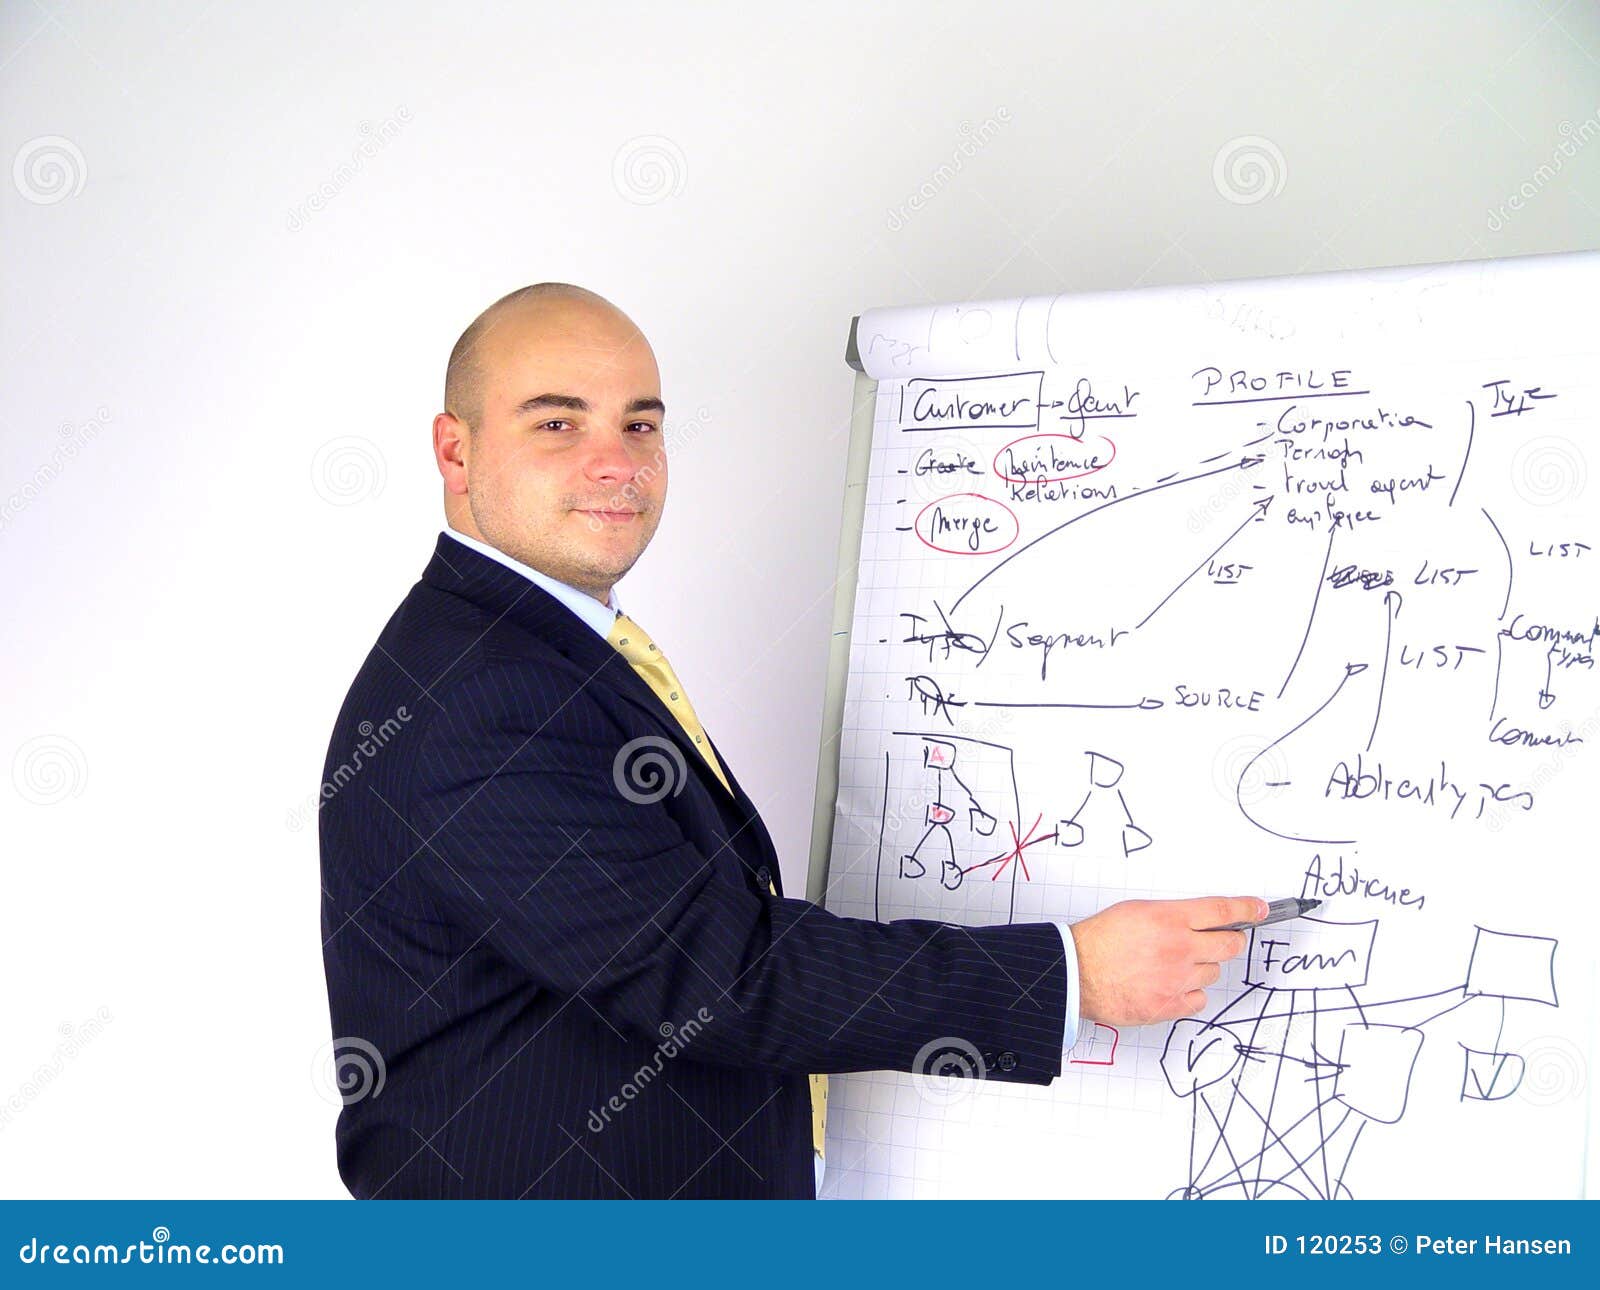 How To Use A Flip Chart In A Presentation